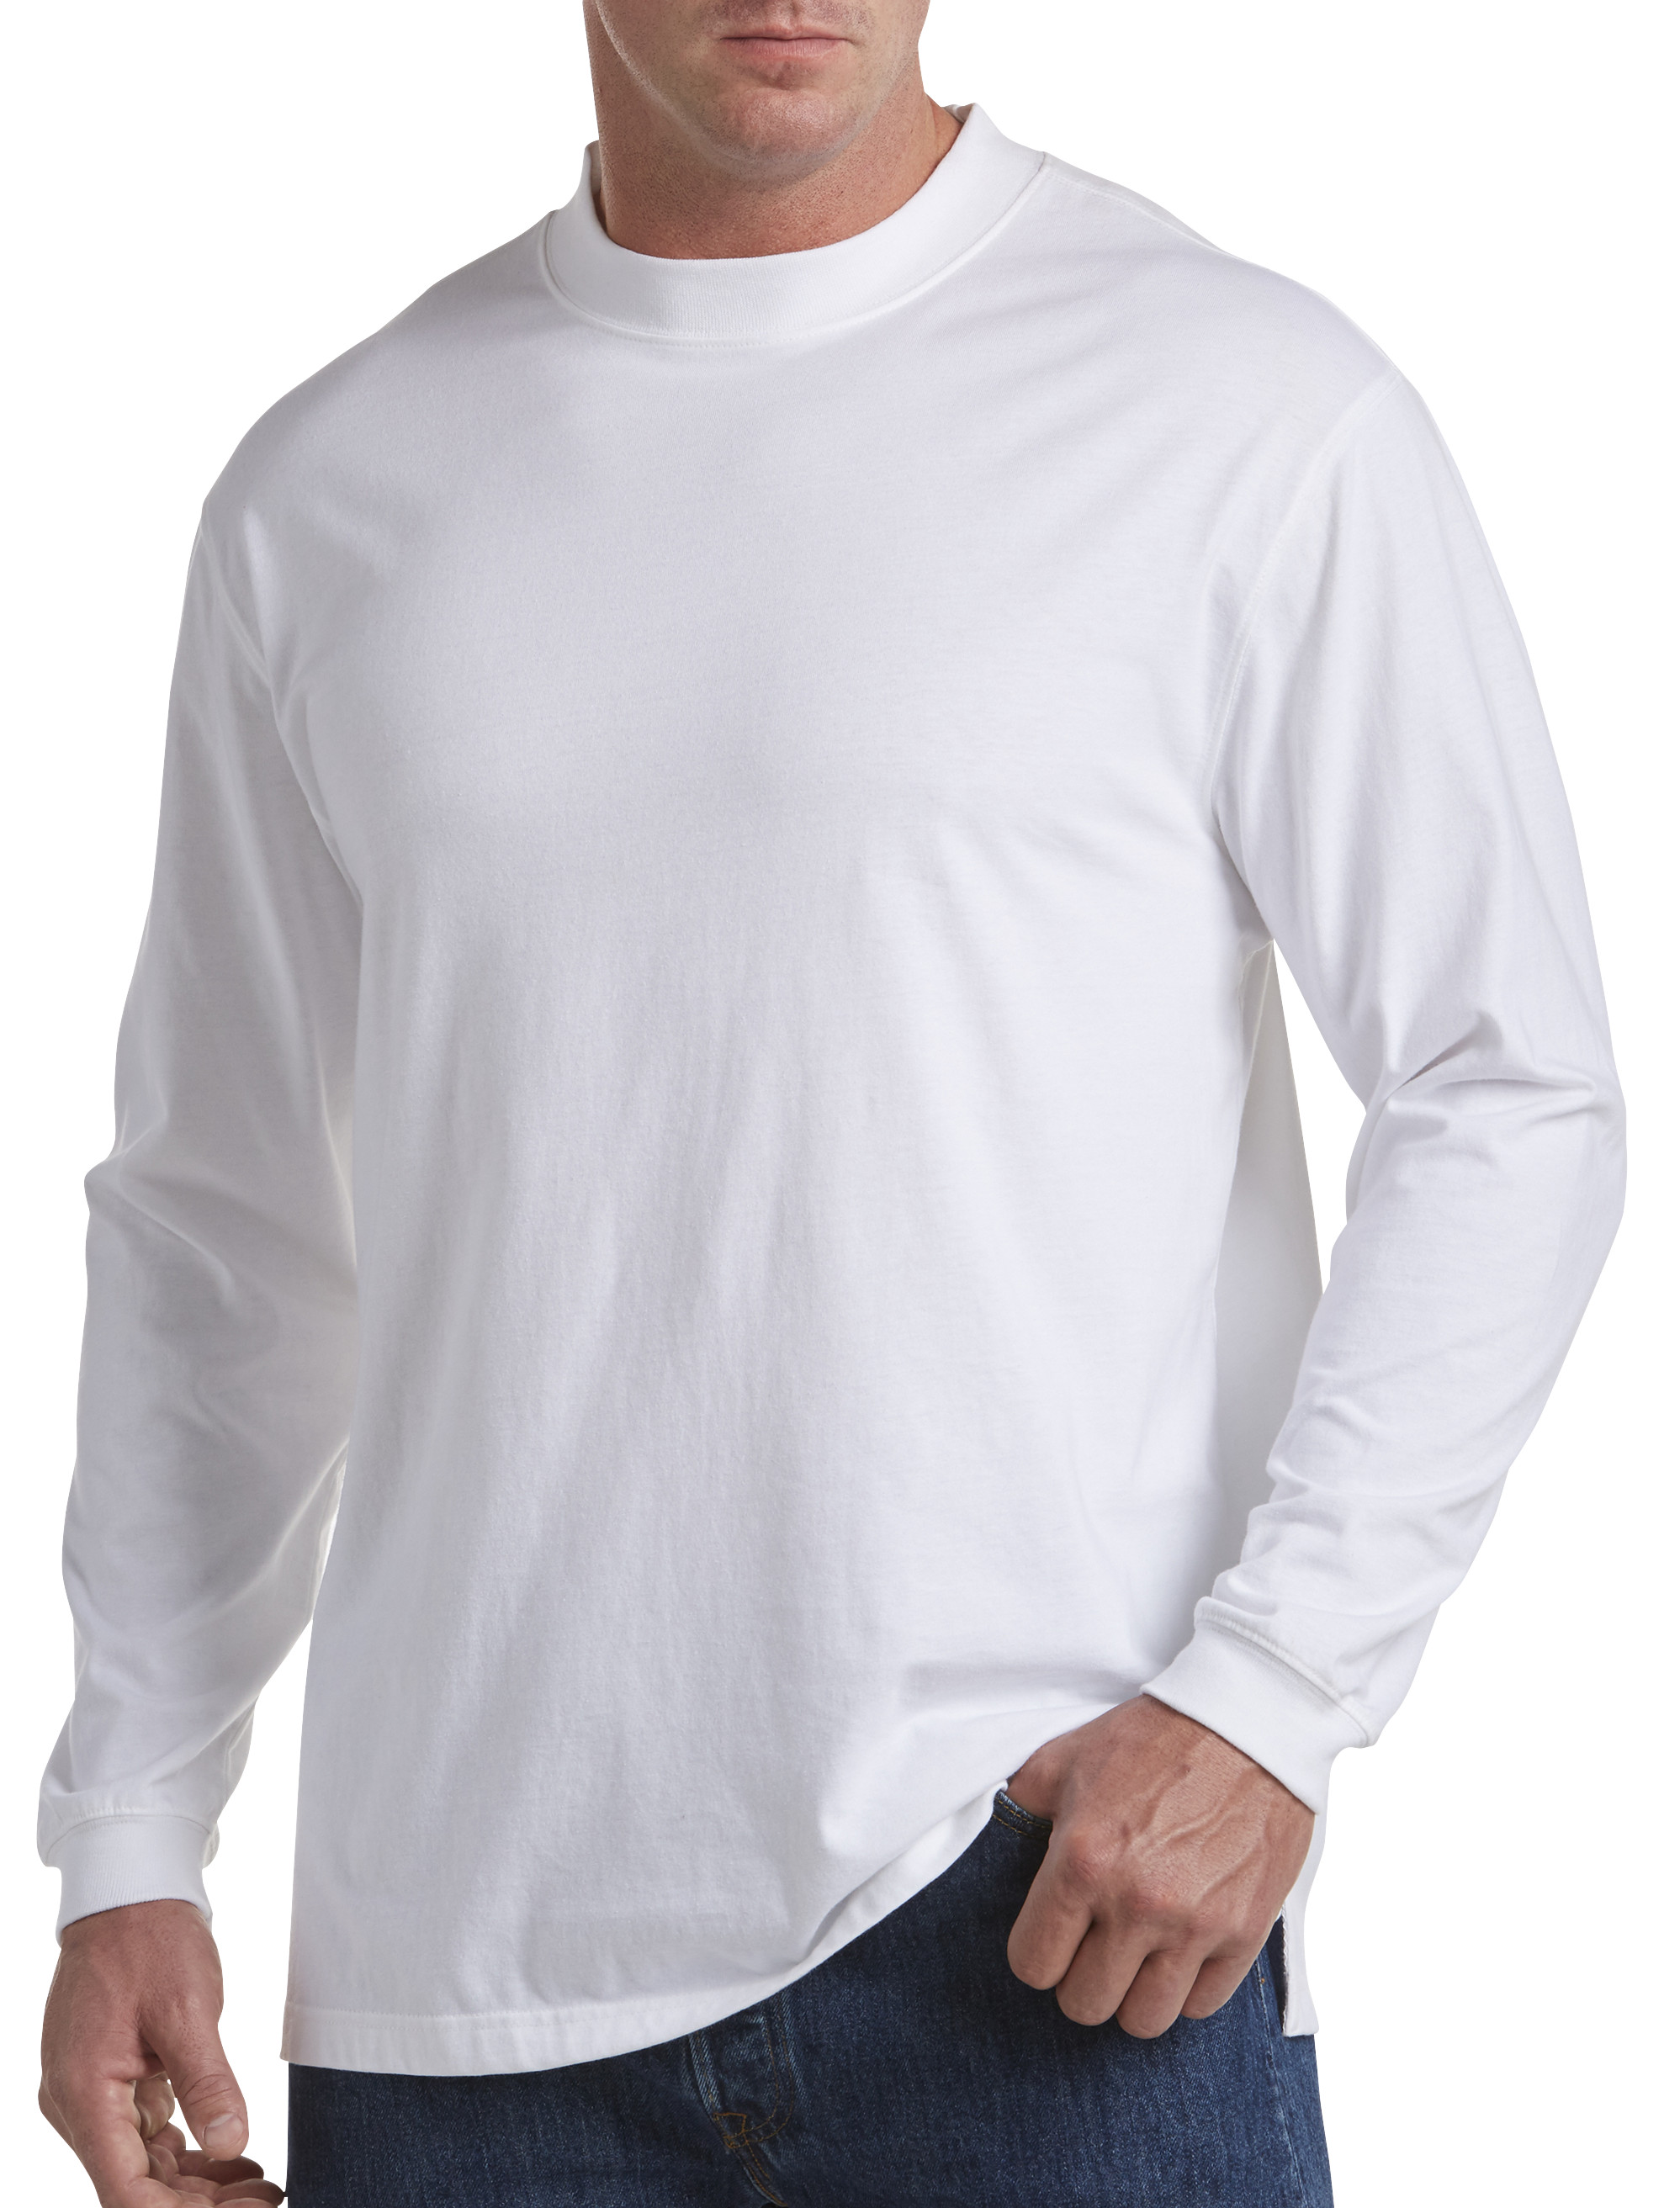  Nautica Men's Long Sleeve Solid Crew Neck T-Shirt (Large, Grey)  : Clothing, Shoes & Jewelry